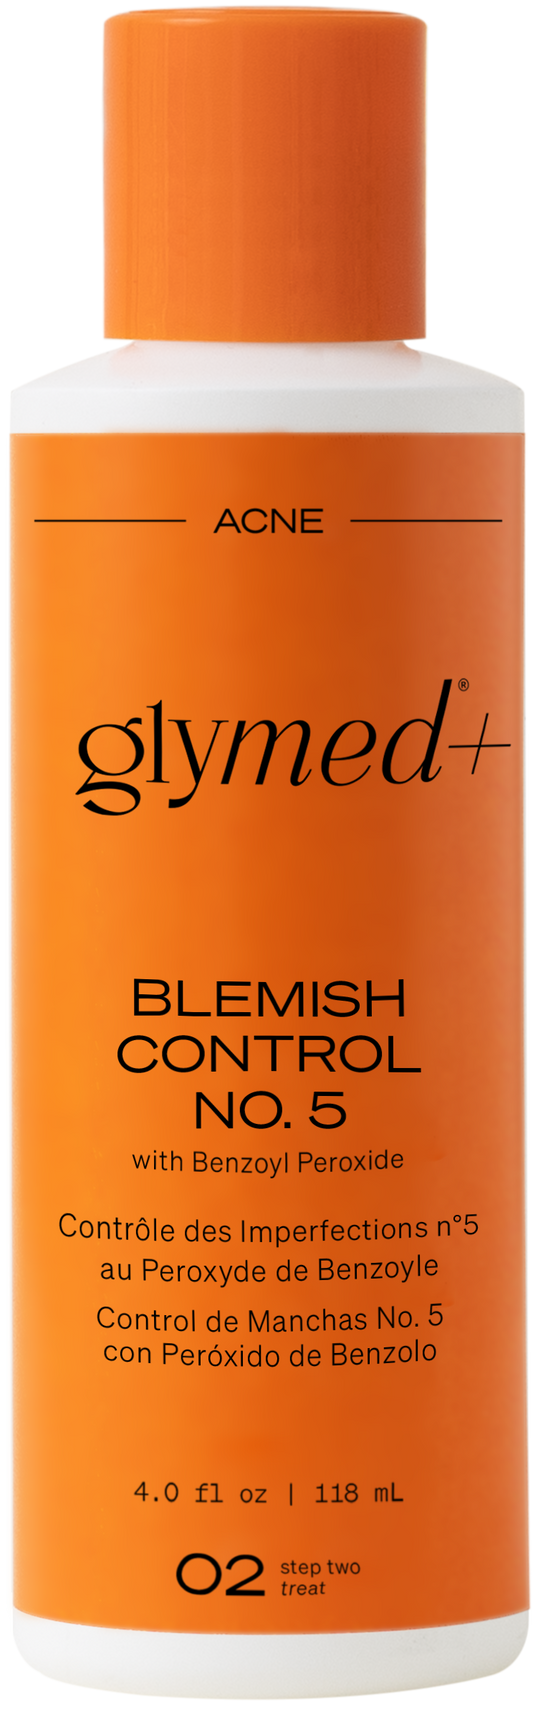 Blemish Control No.5 with Benzoyl Peroxide